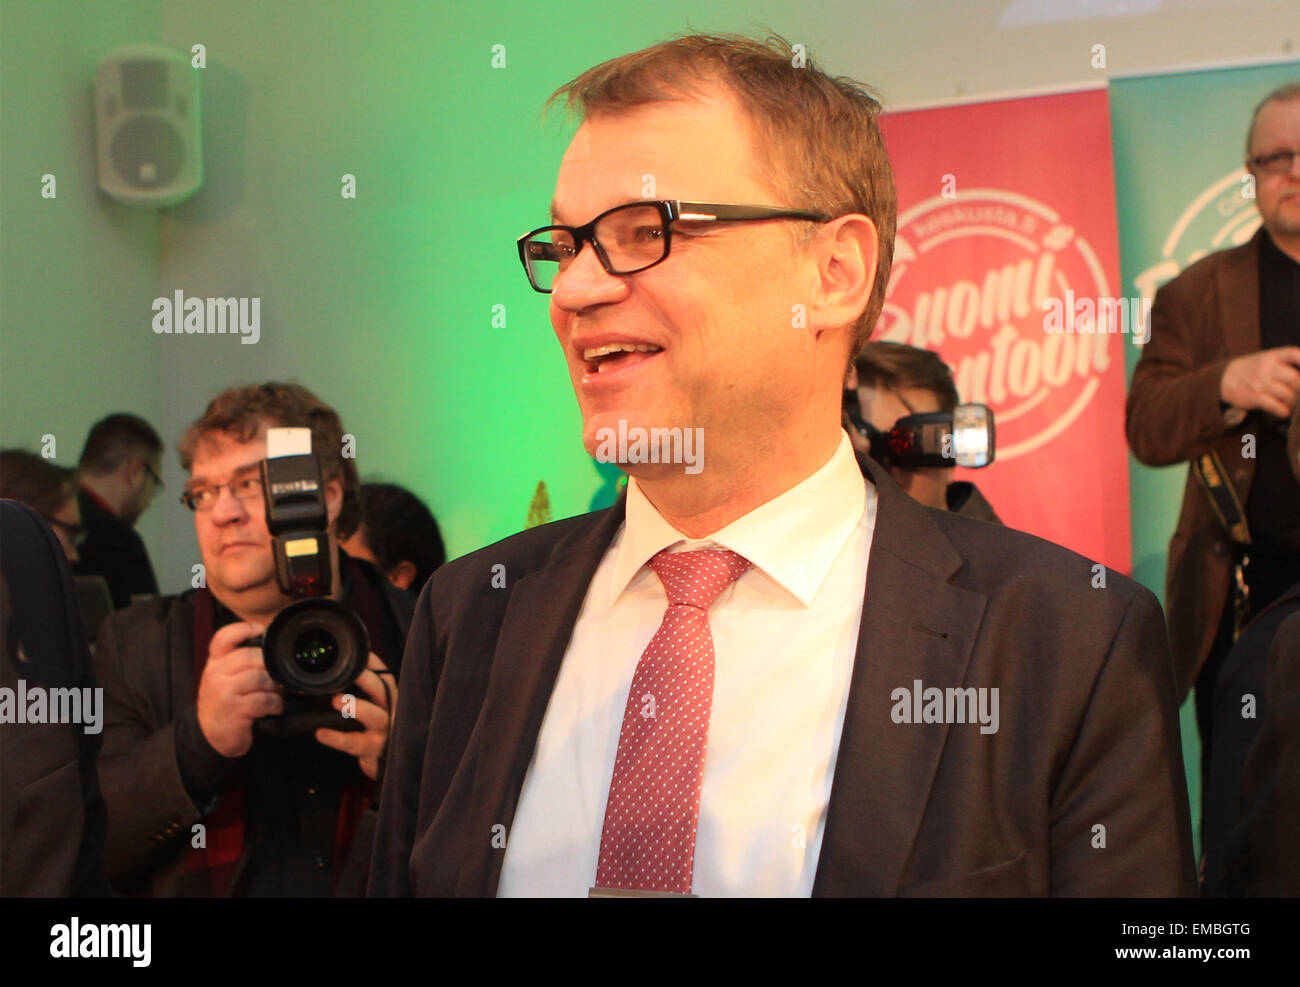 Helsinki. 19th Apr, 2015. The Center Party chair Juha Sipila celebrates with colleagues in Helsinki, Finland on April 19, 2015. Finland's Center Party was predicted by Finnish national broadcaster Yle to be the winner of Sunday's parliamentary election. © Li Jizhi/Xinhua/Alamy Live News Stock Photo